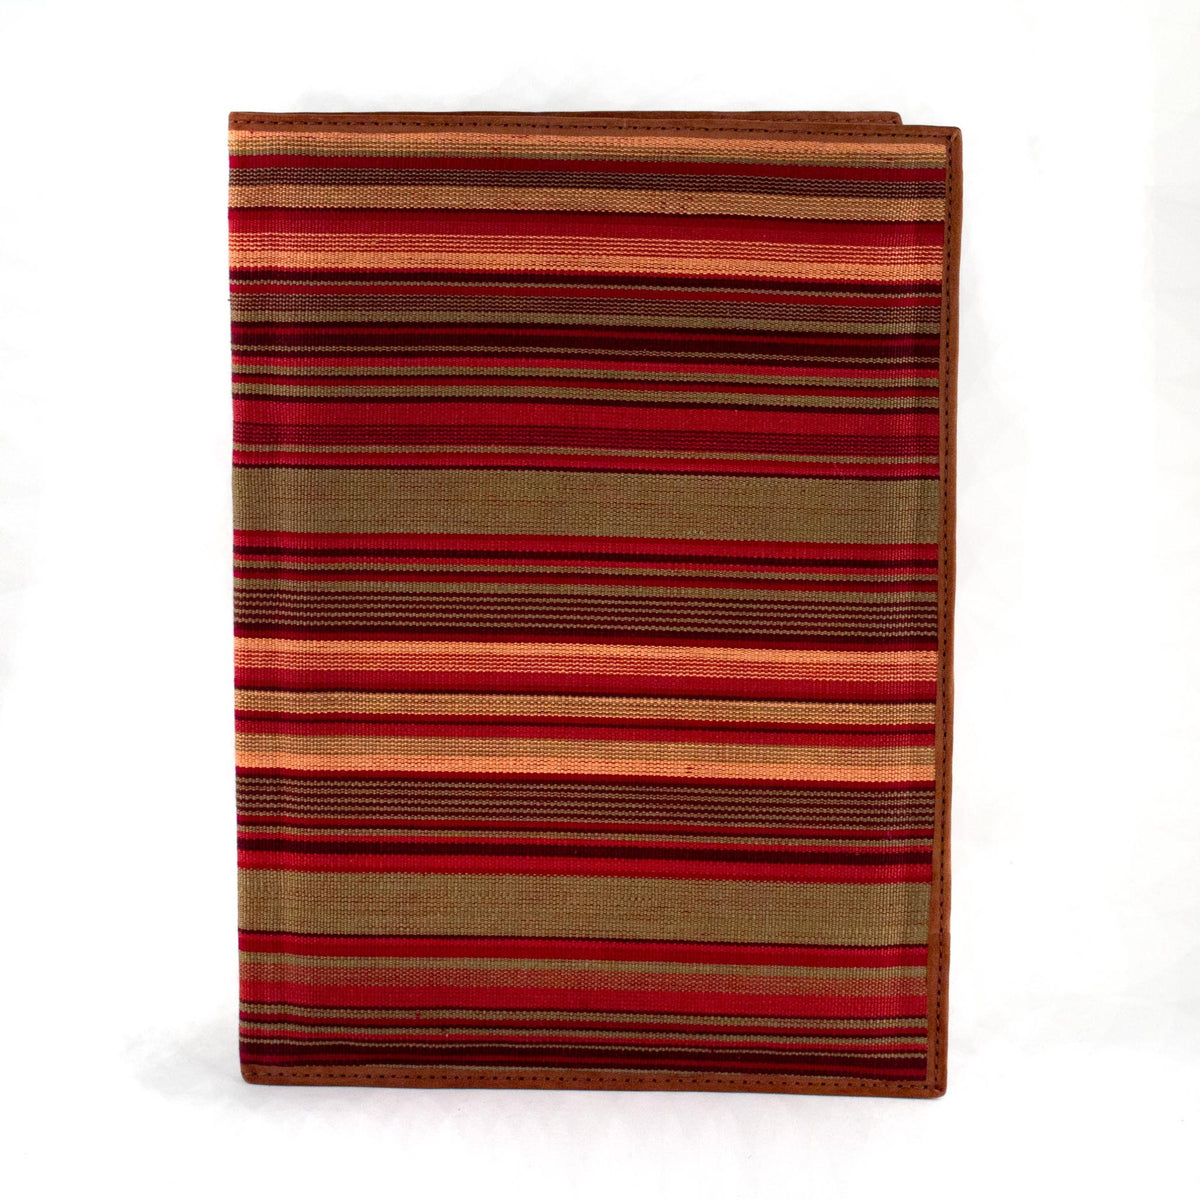 olive and brick striped notebook portfolio with brown leather trim